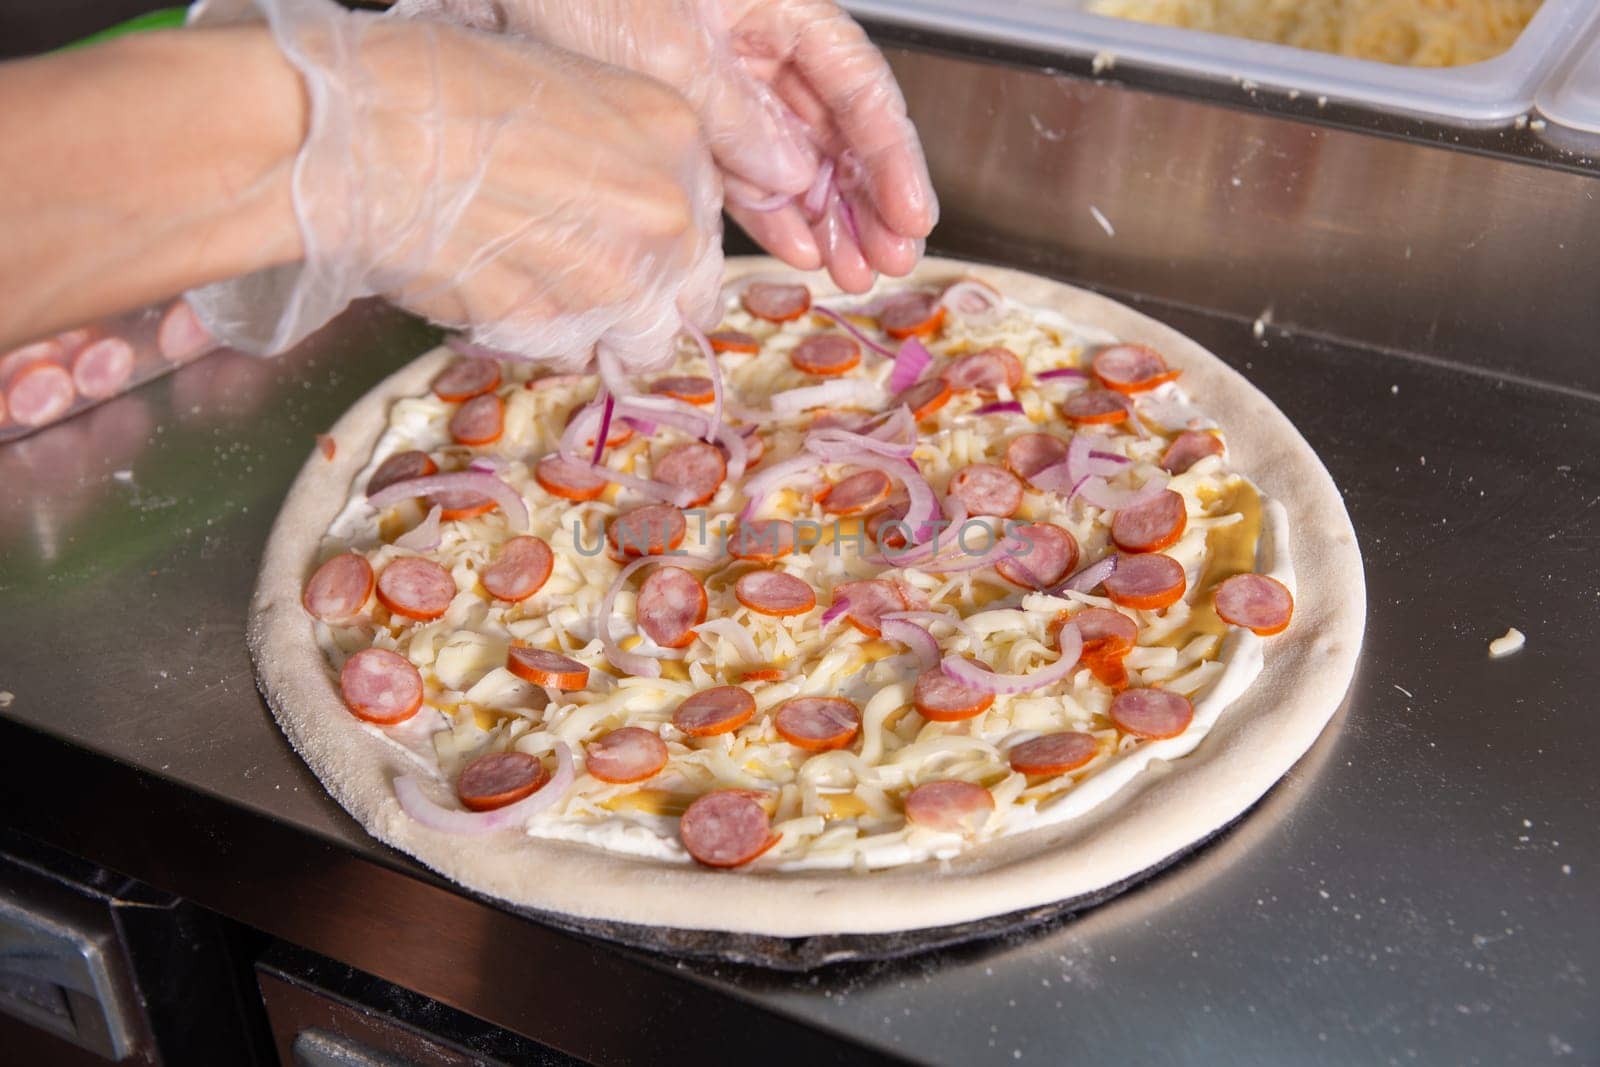 The chef prepares a classic Italian pizza with sausages, mushrooms and tomatoes. The cook sprinkles the pizza with chopped onions